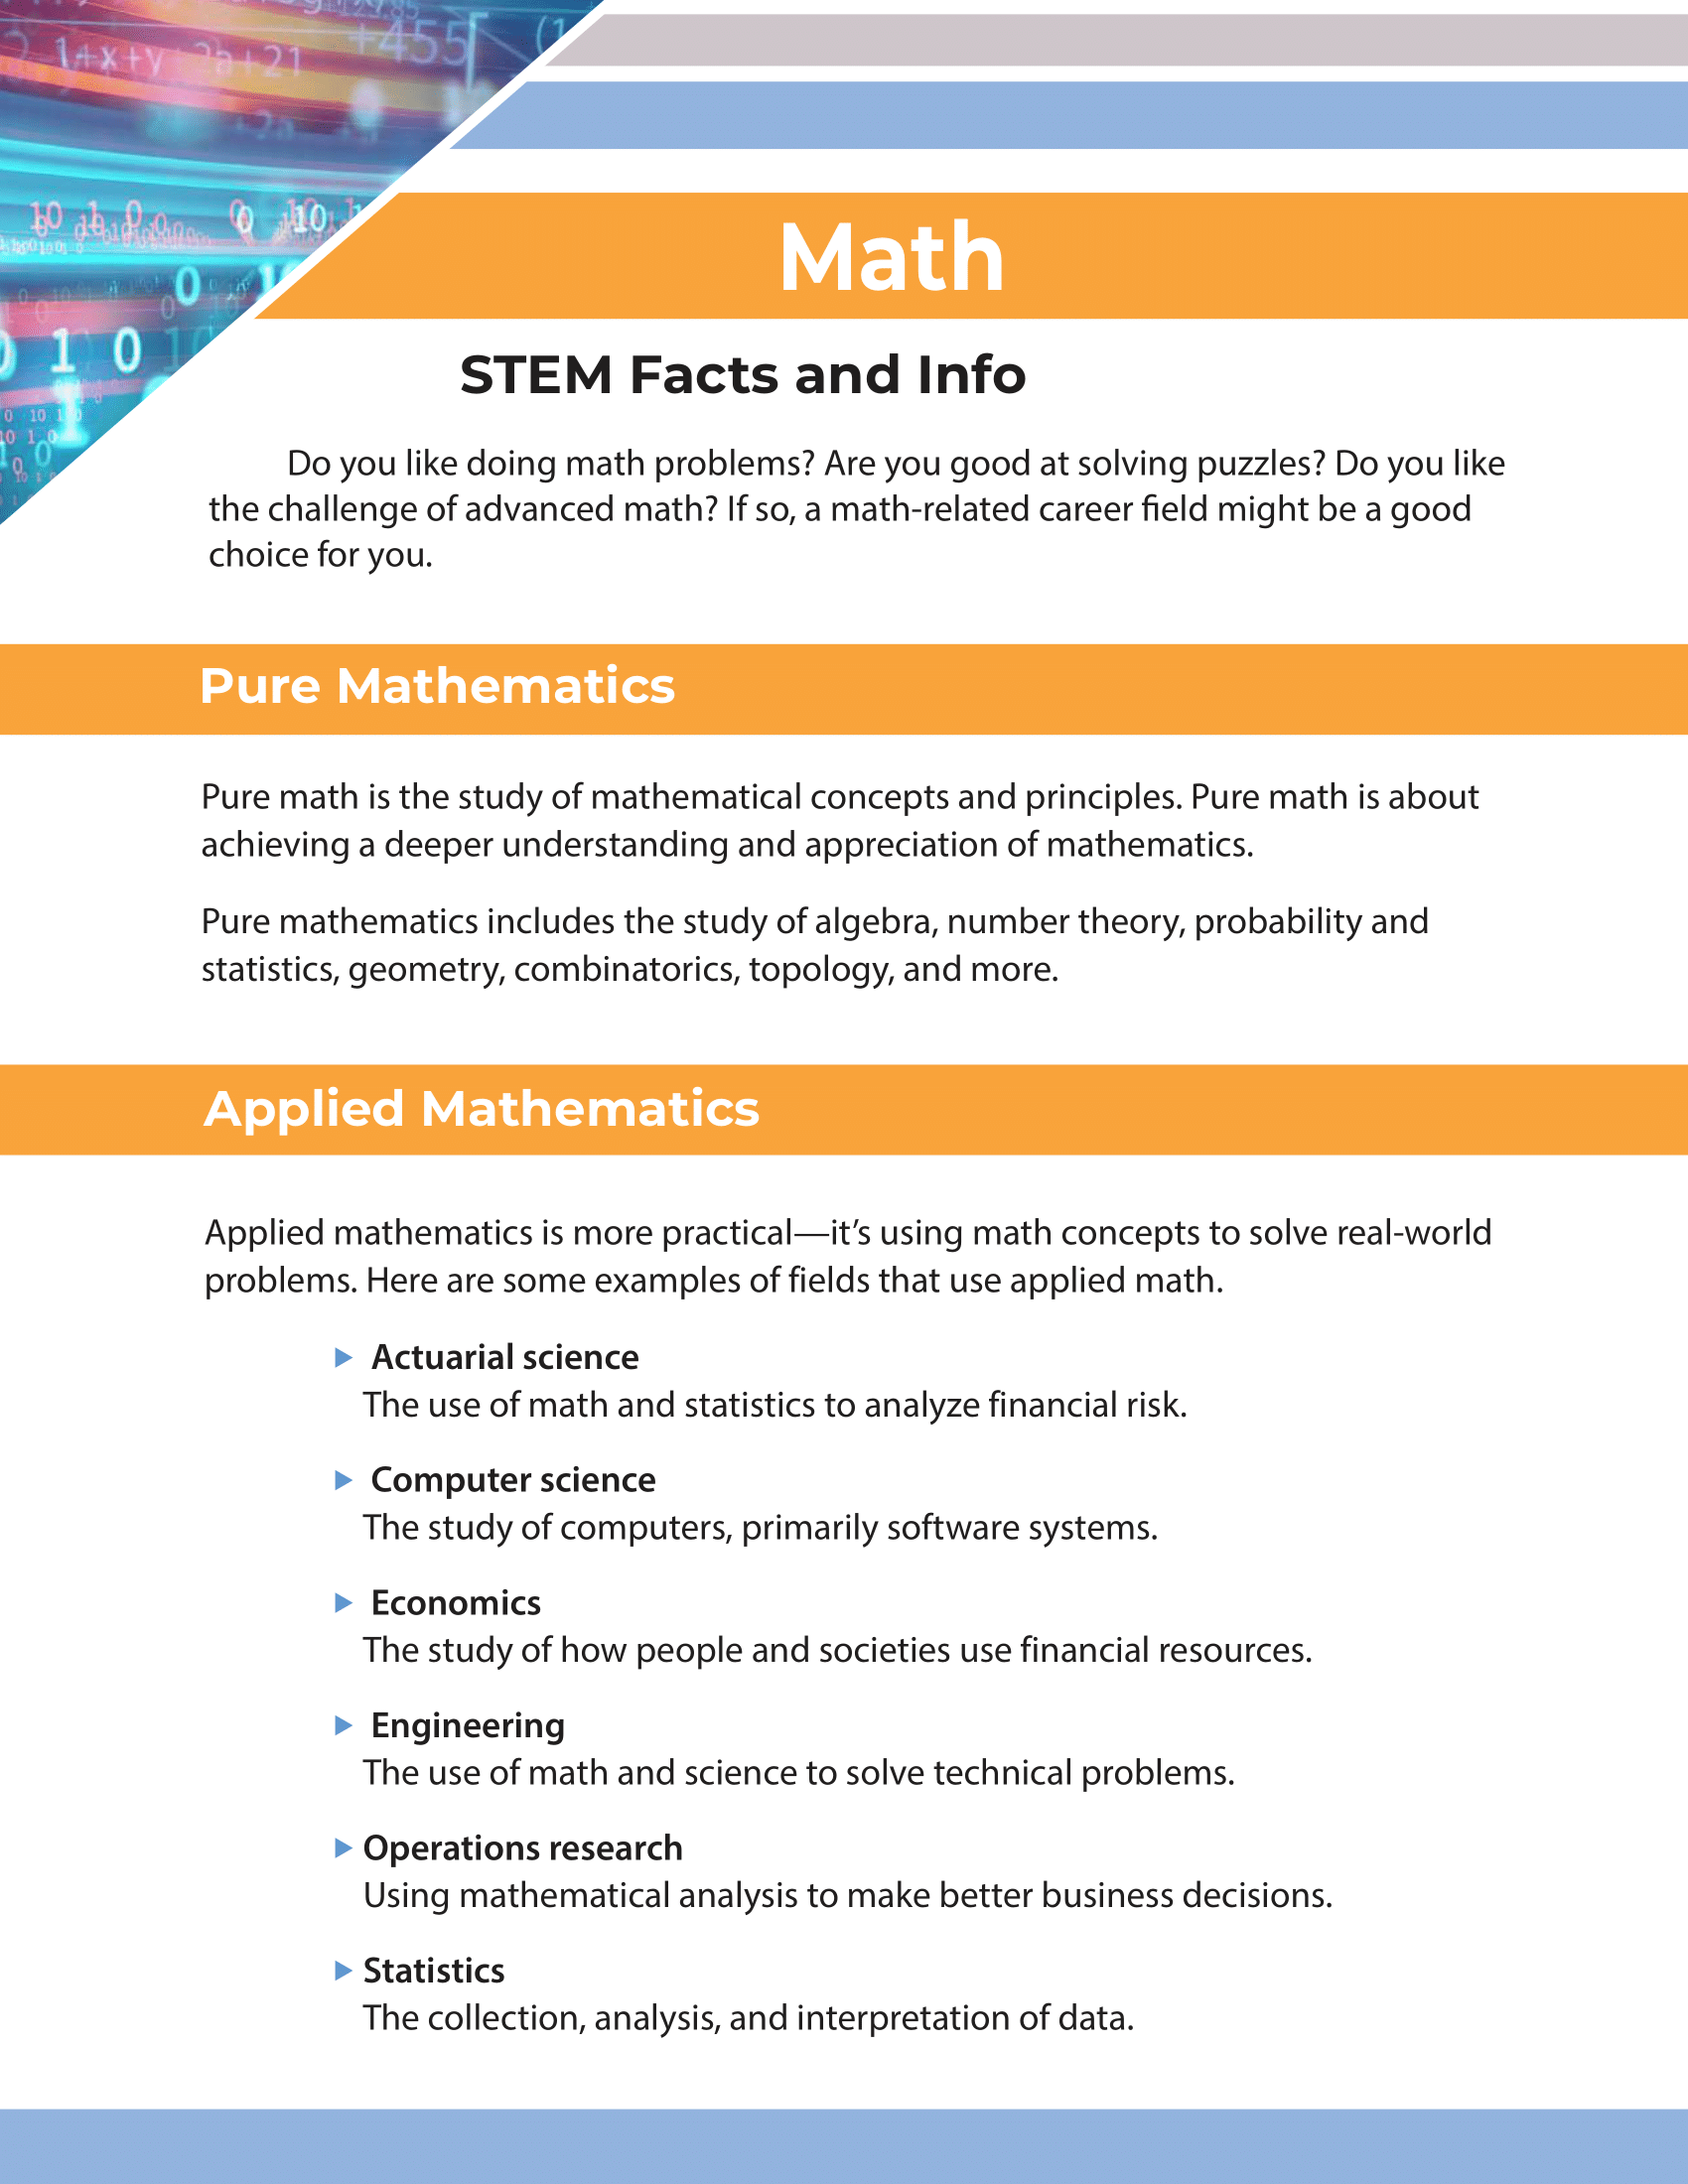 STEM Facts and Info - Math